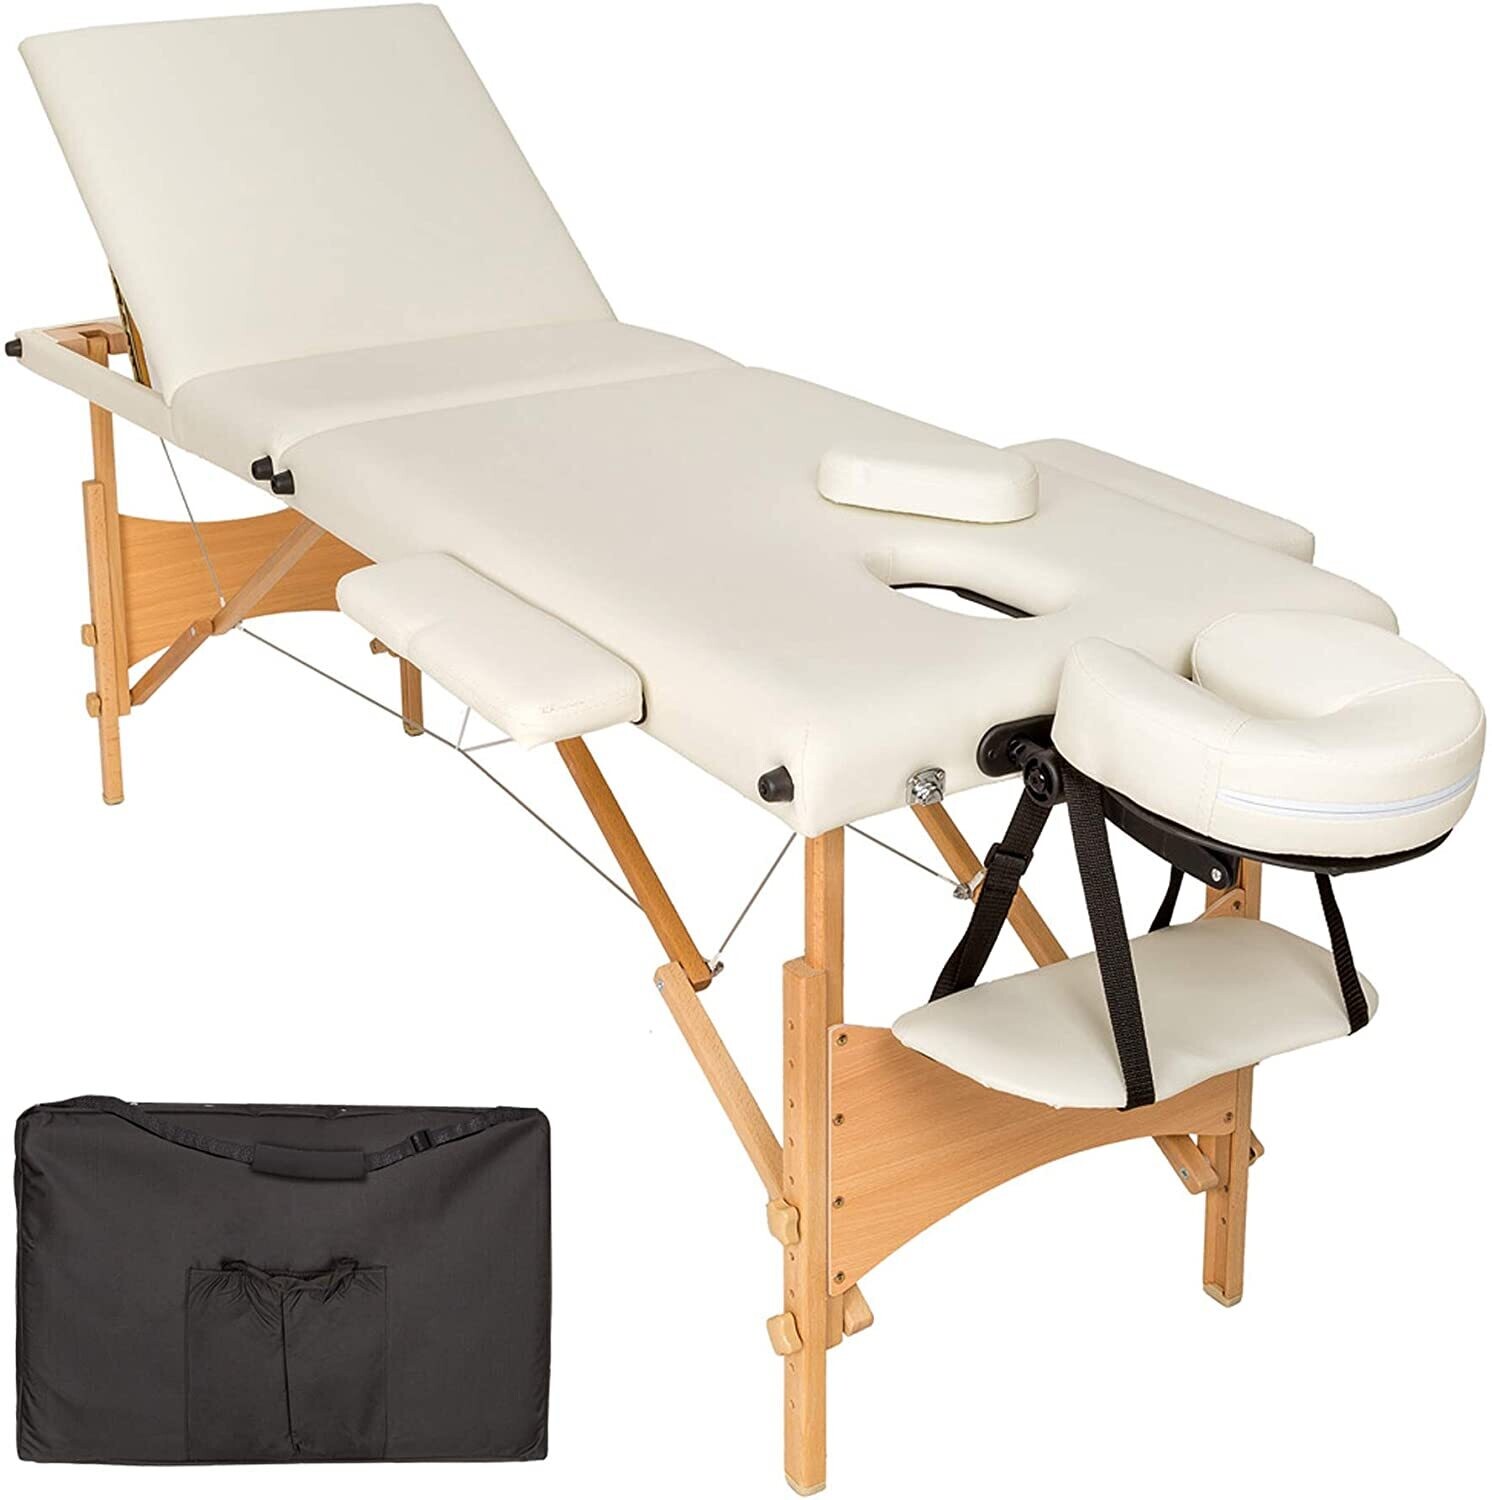 Mobile Massage Table 3 Zones Height